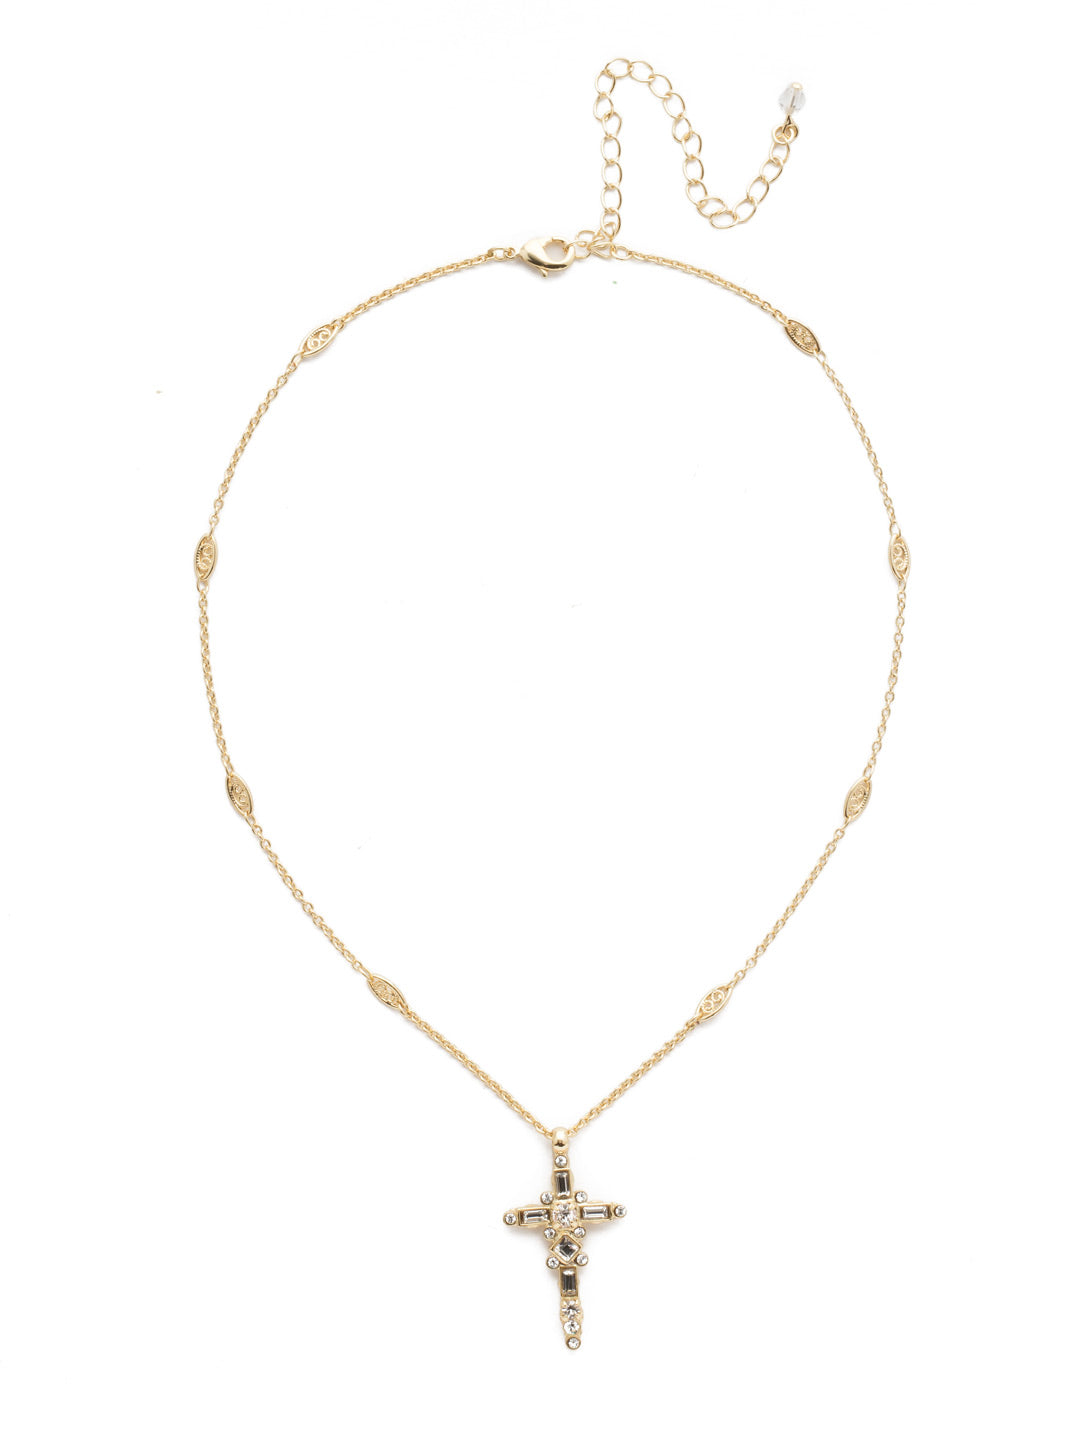 Dierdre Cross Pendant Necklace - NDQ54BGCRY - <p>A truly divine pendant. This delicate cross necklace features multi-cut crystals in an antique inspired setting. This crystal cross necklace offers movement on the chain for ease of wear. From Sorrelli's Crystal collection in our Bright Gold-tone finish.</p>